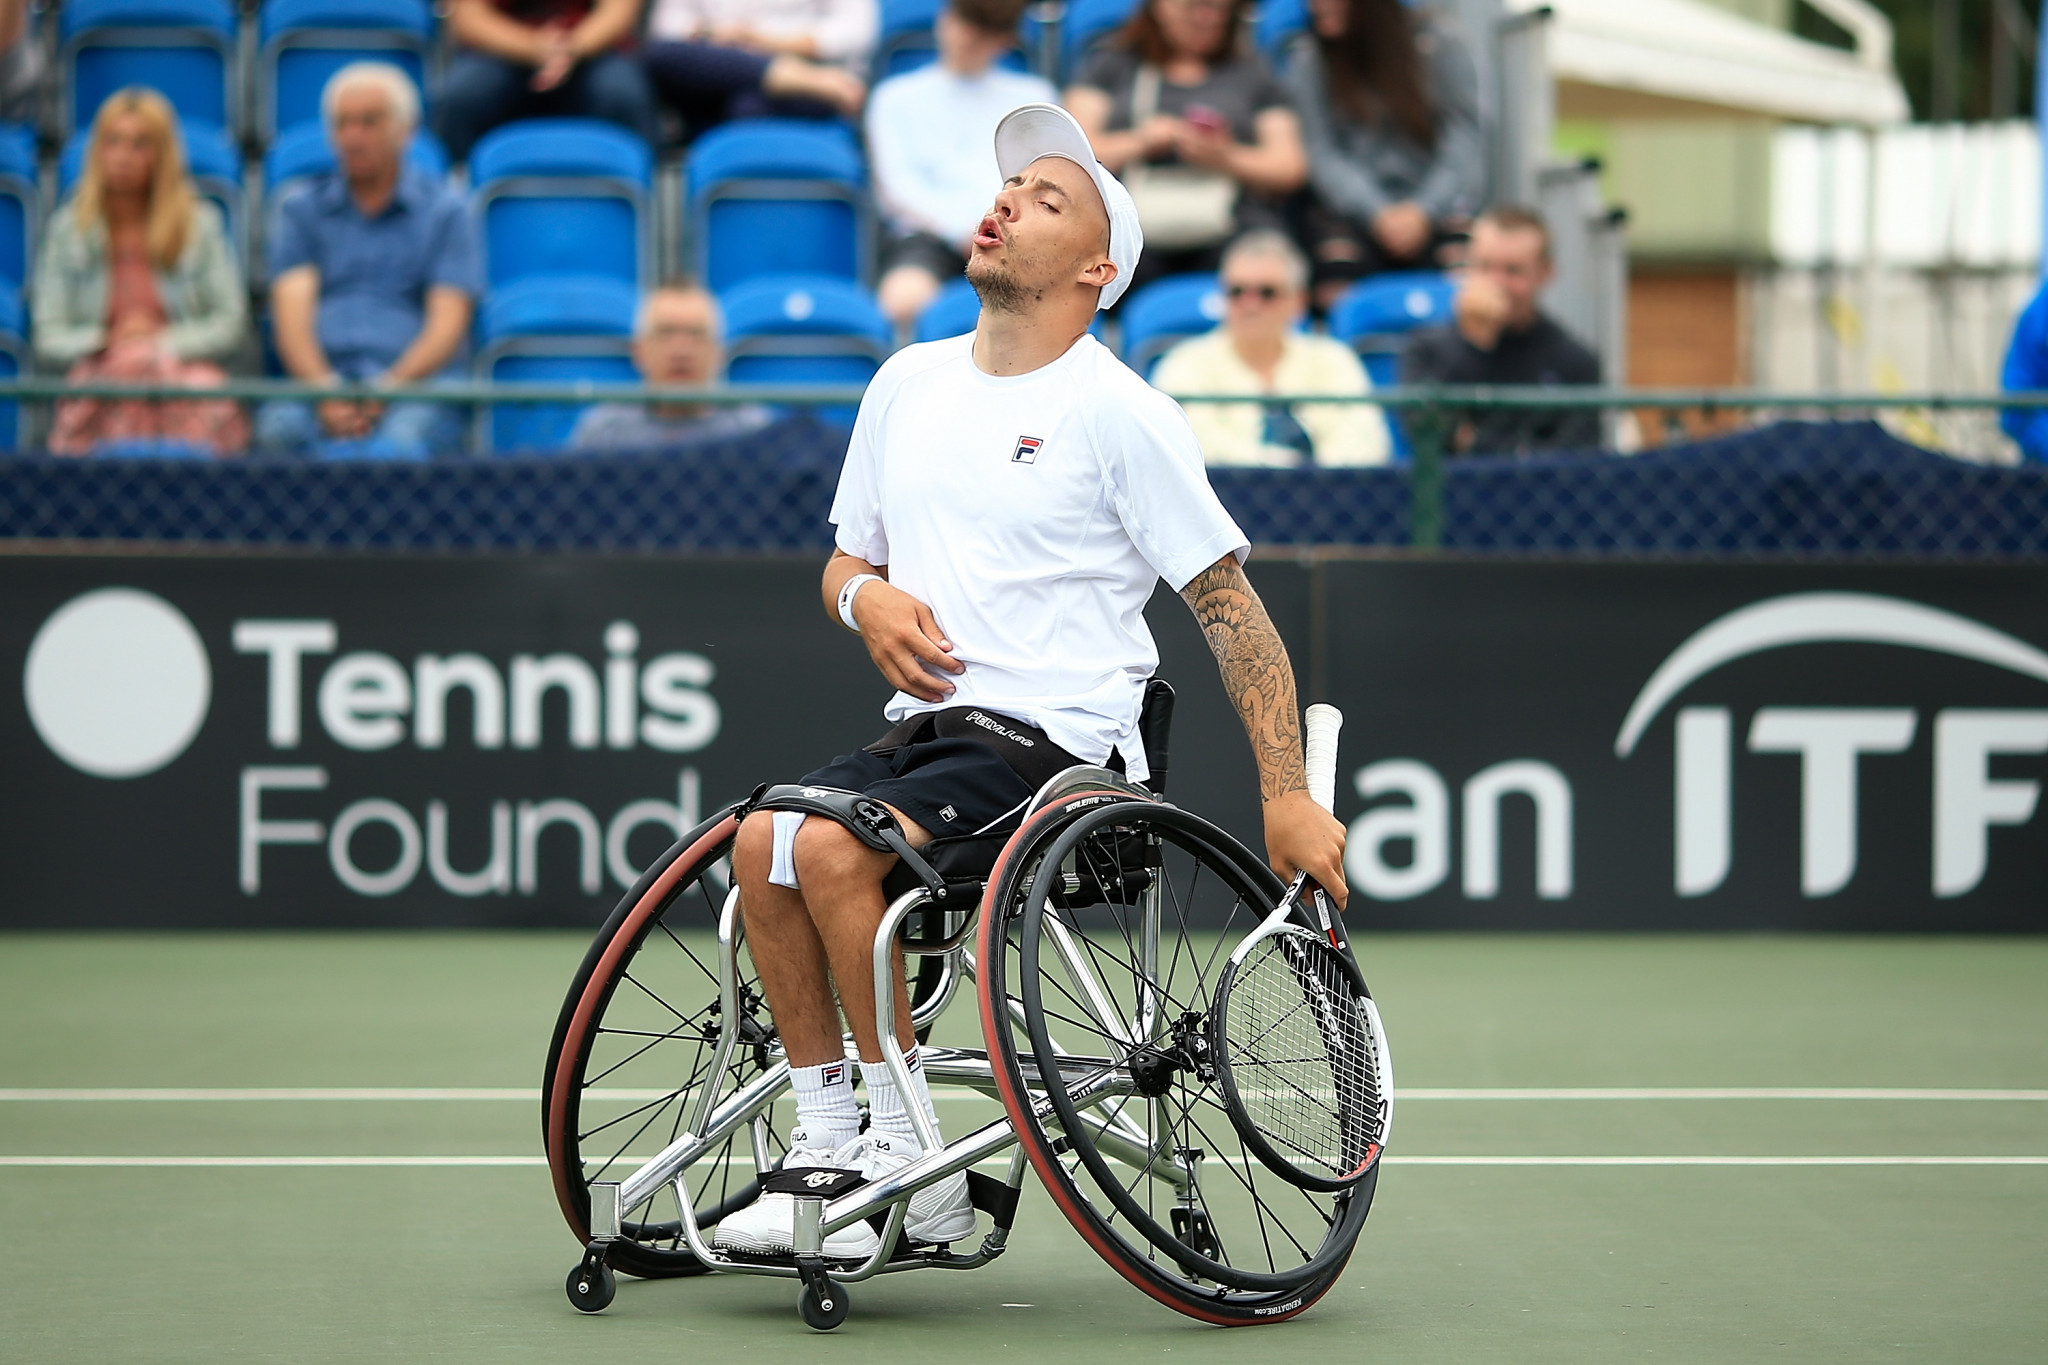 Home favourite loses final at British Open Wheelchair Tennis Championships